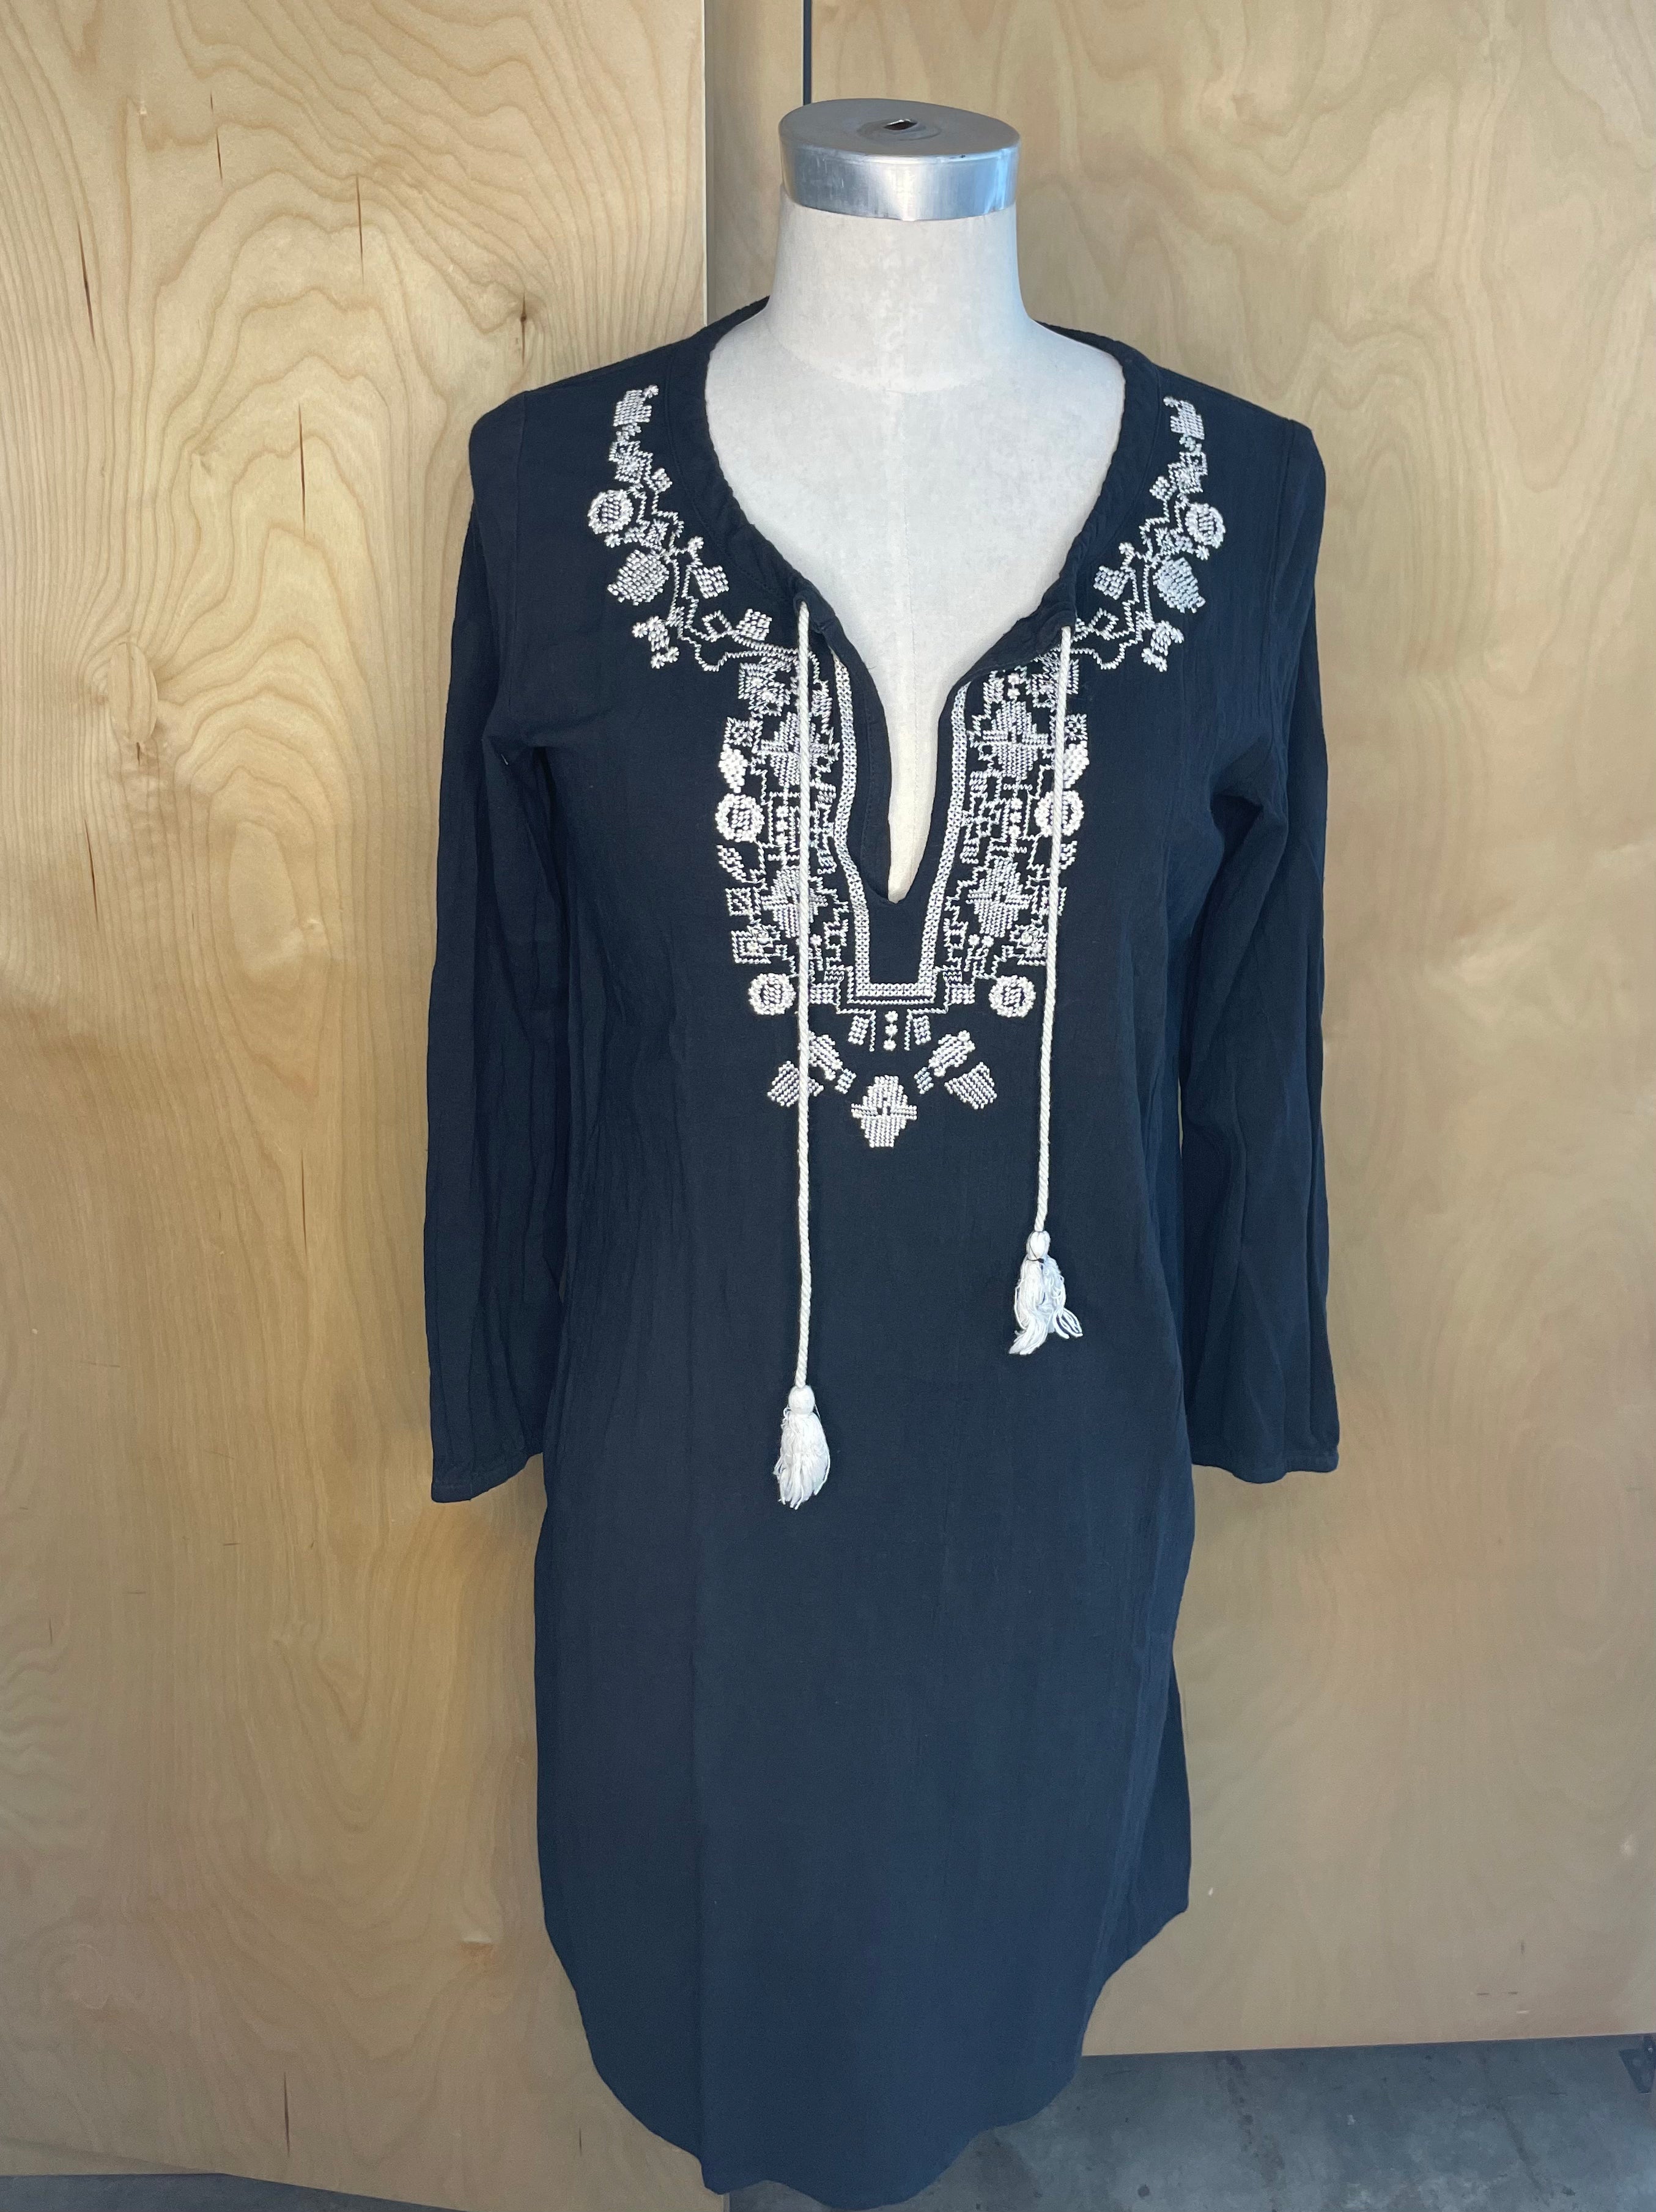 Black and White Embroidered Dress